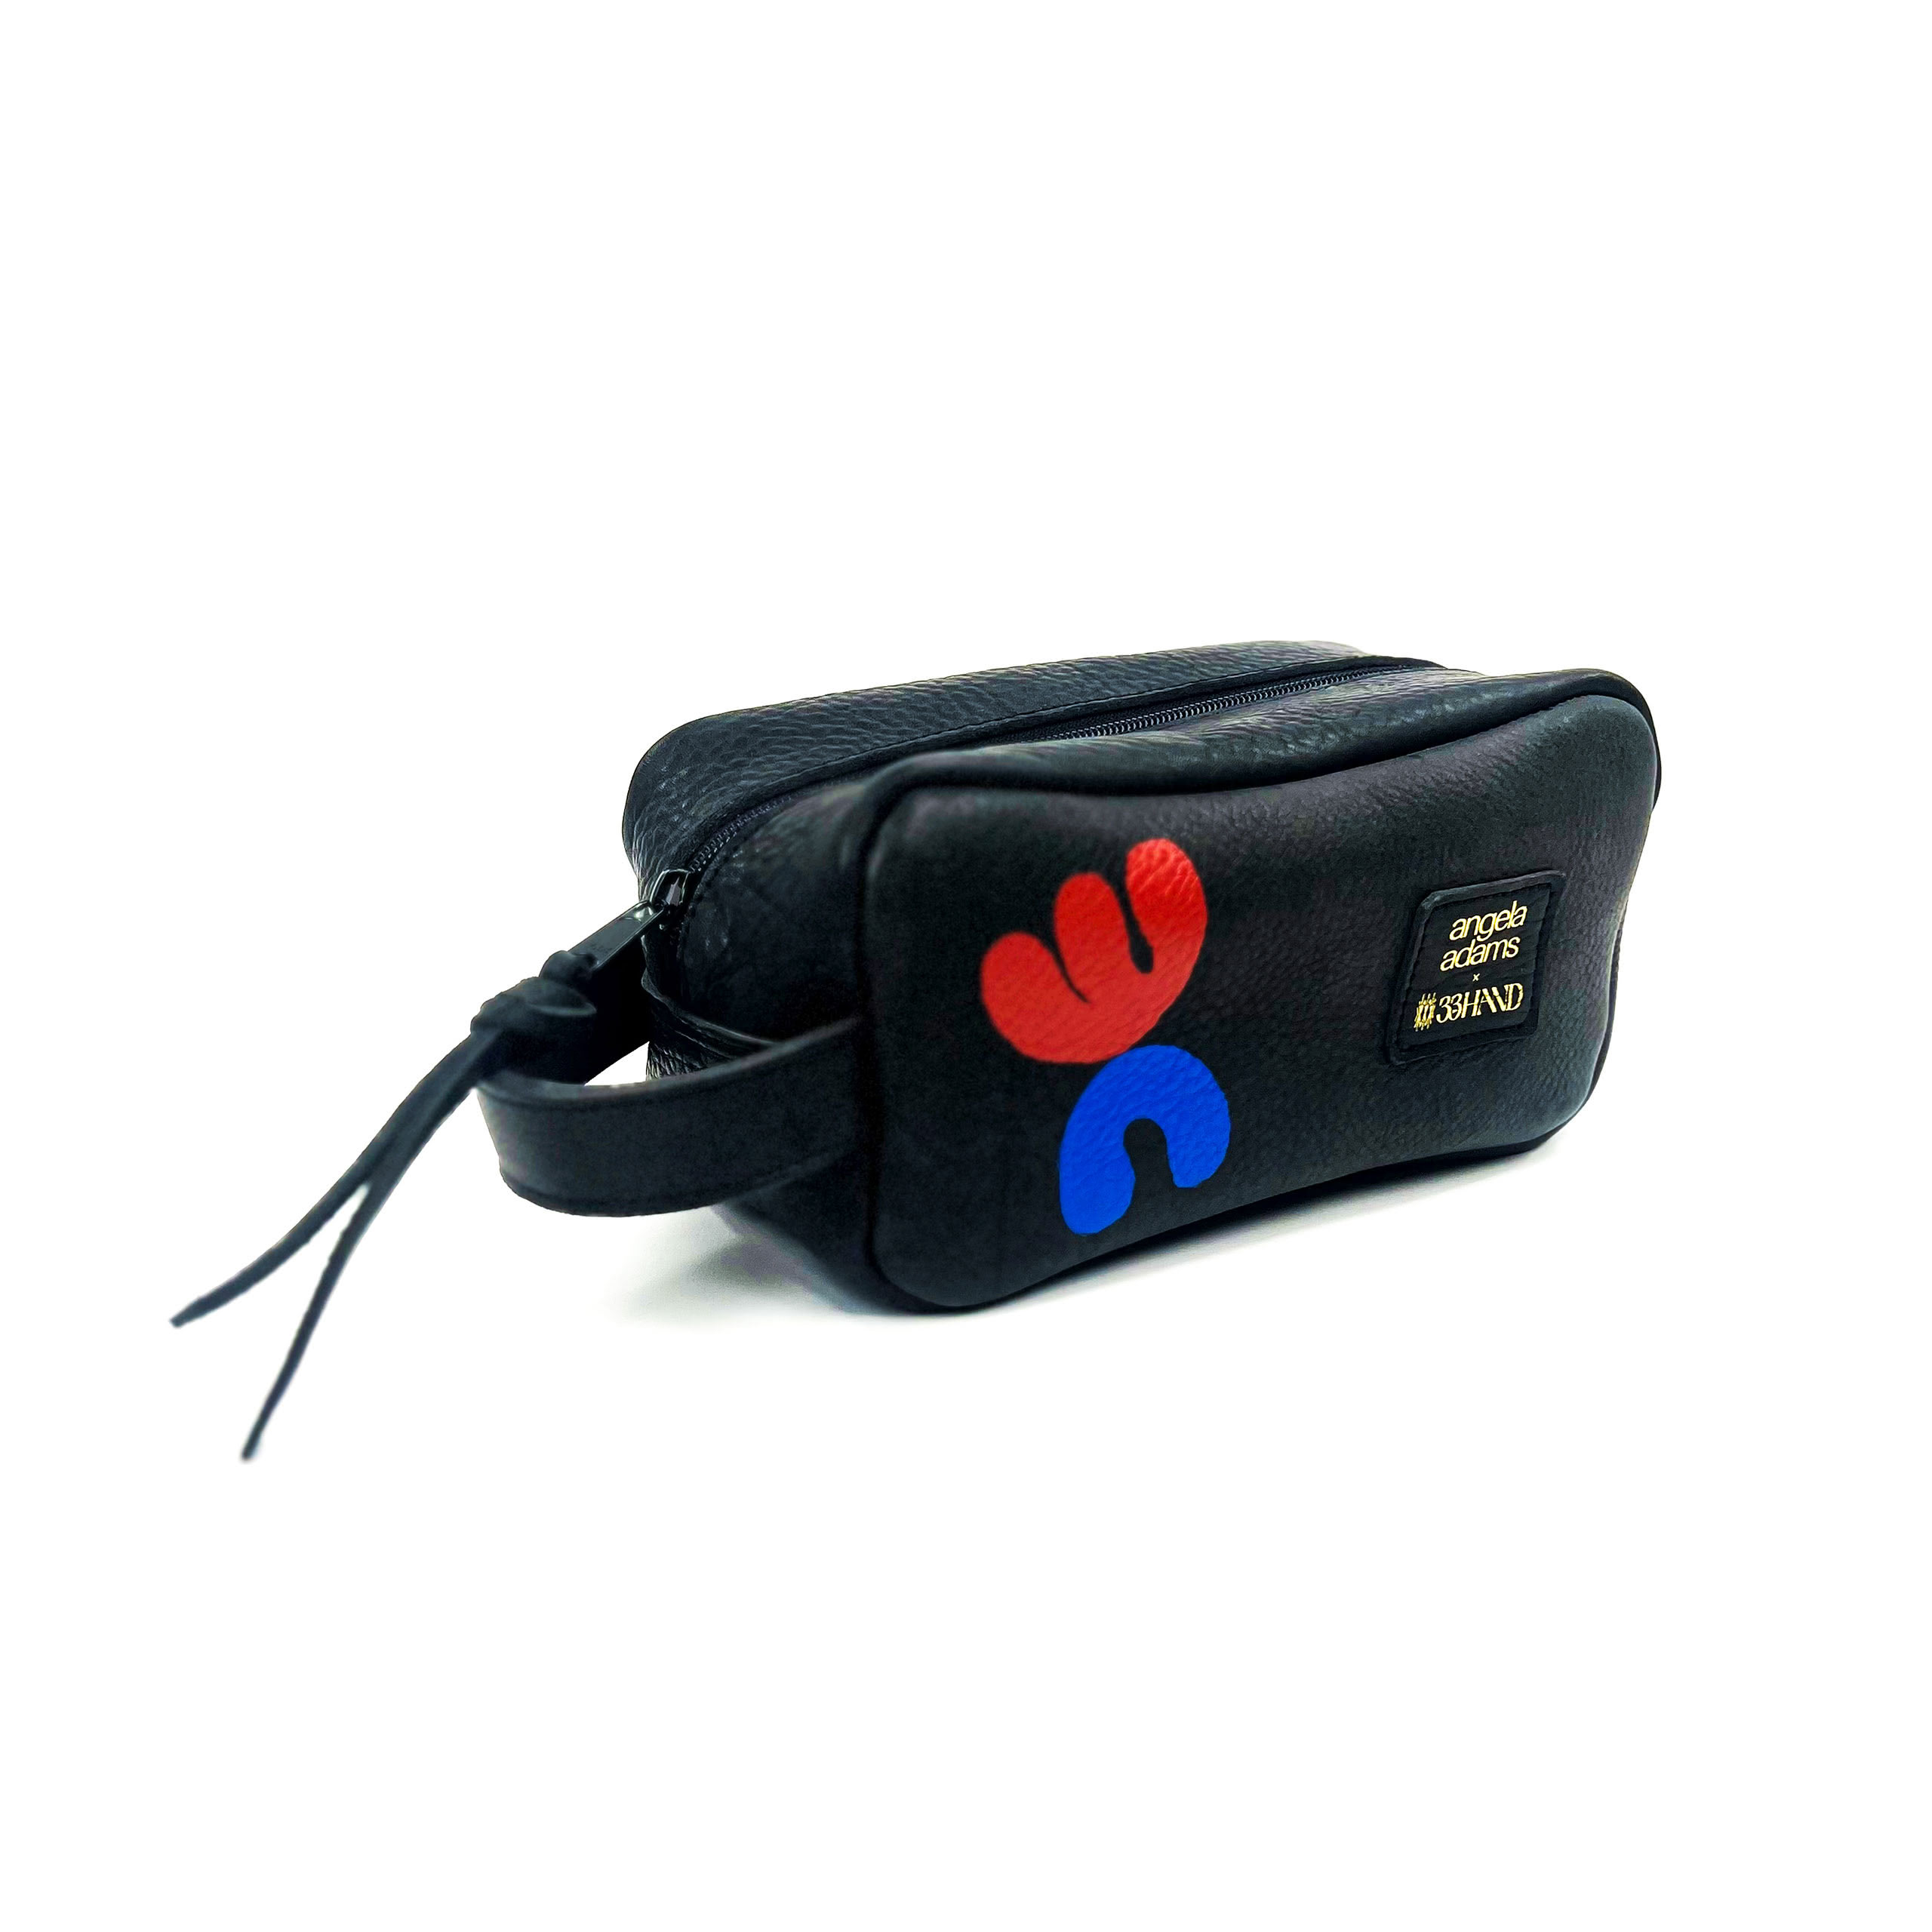 Black cosmetic bag with a red and blue handprint logo and text on the side, positioned against a white background.